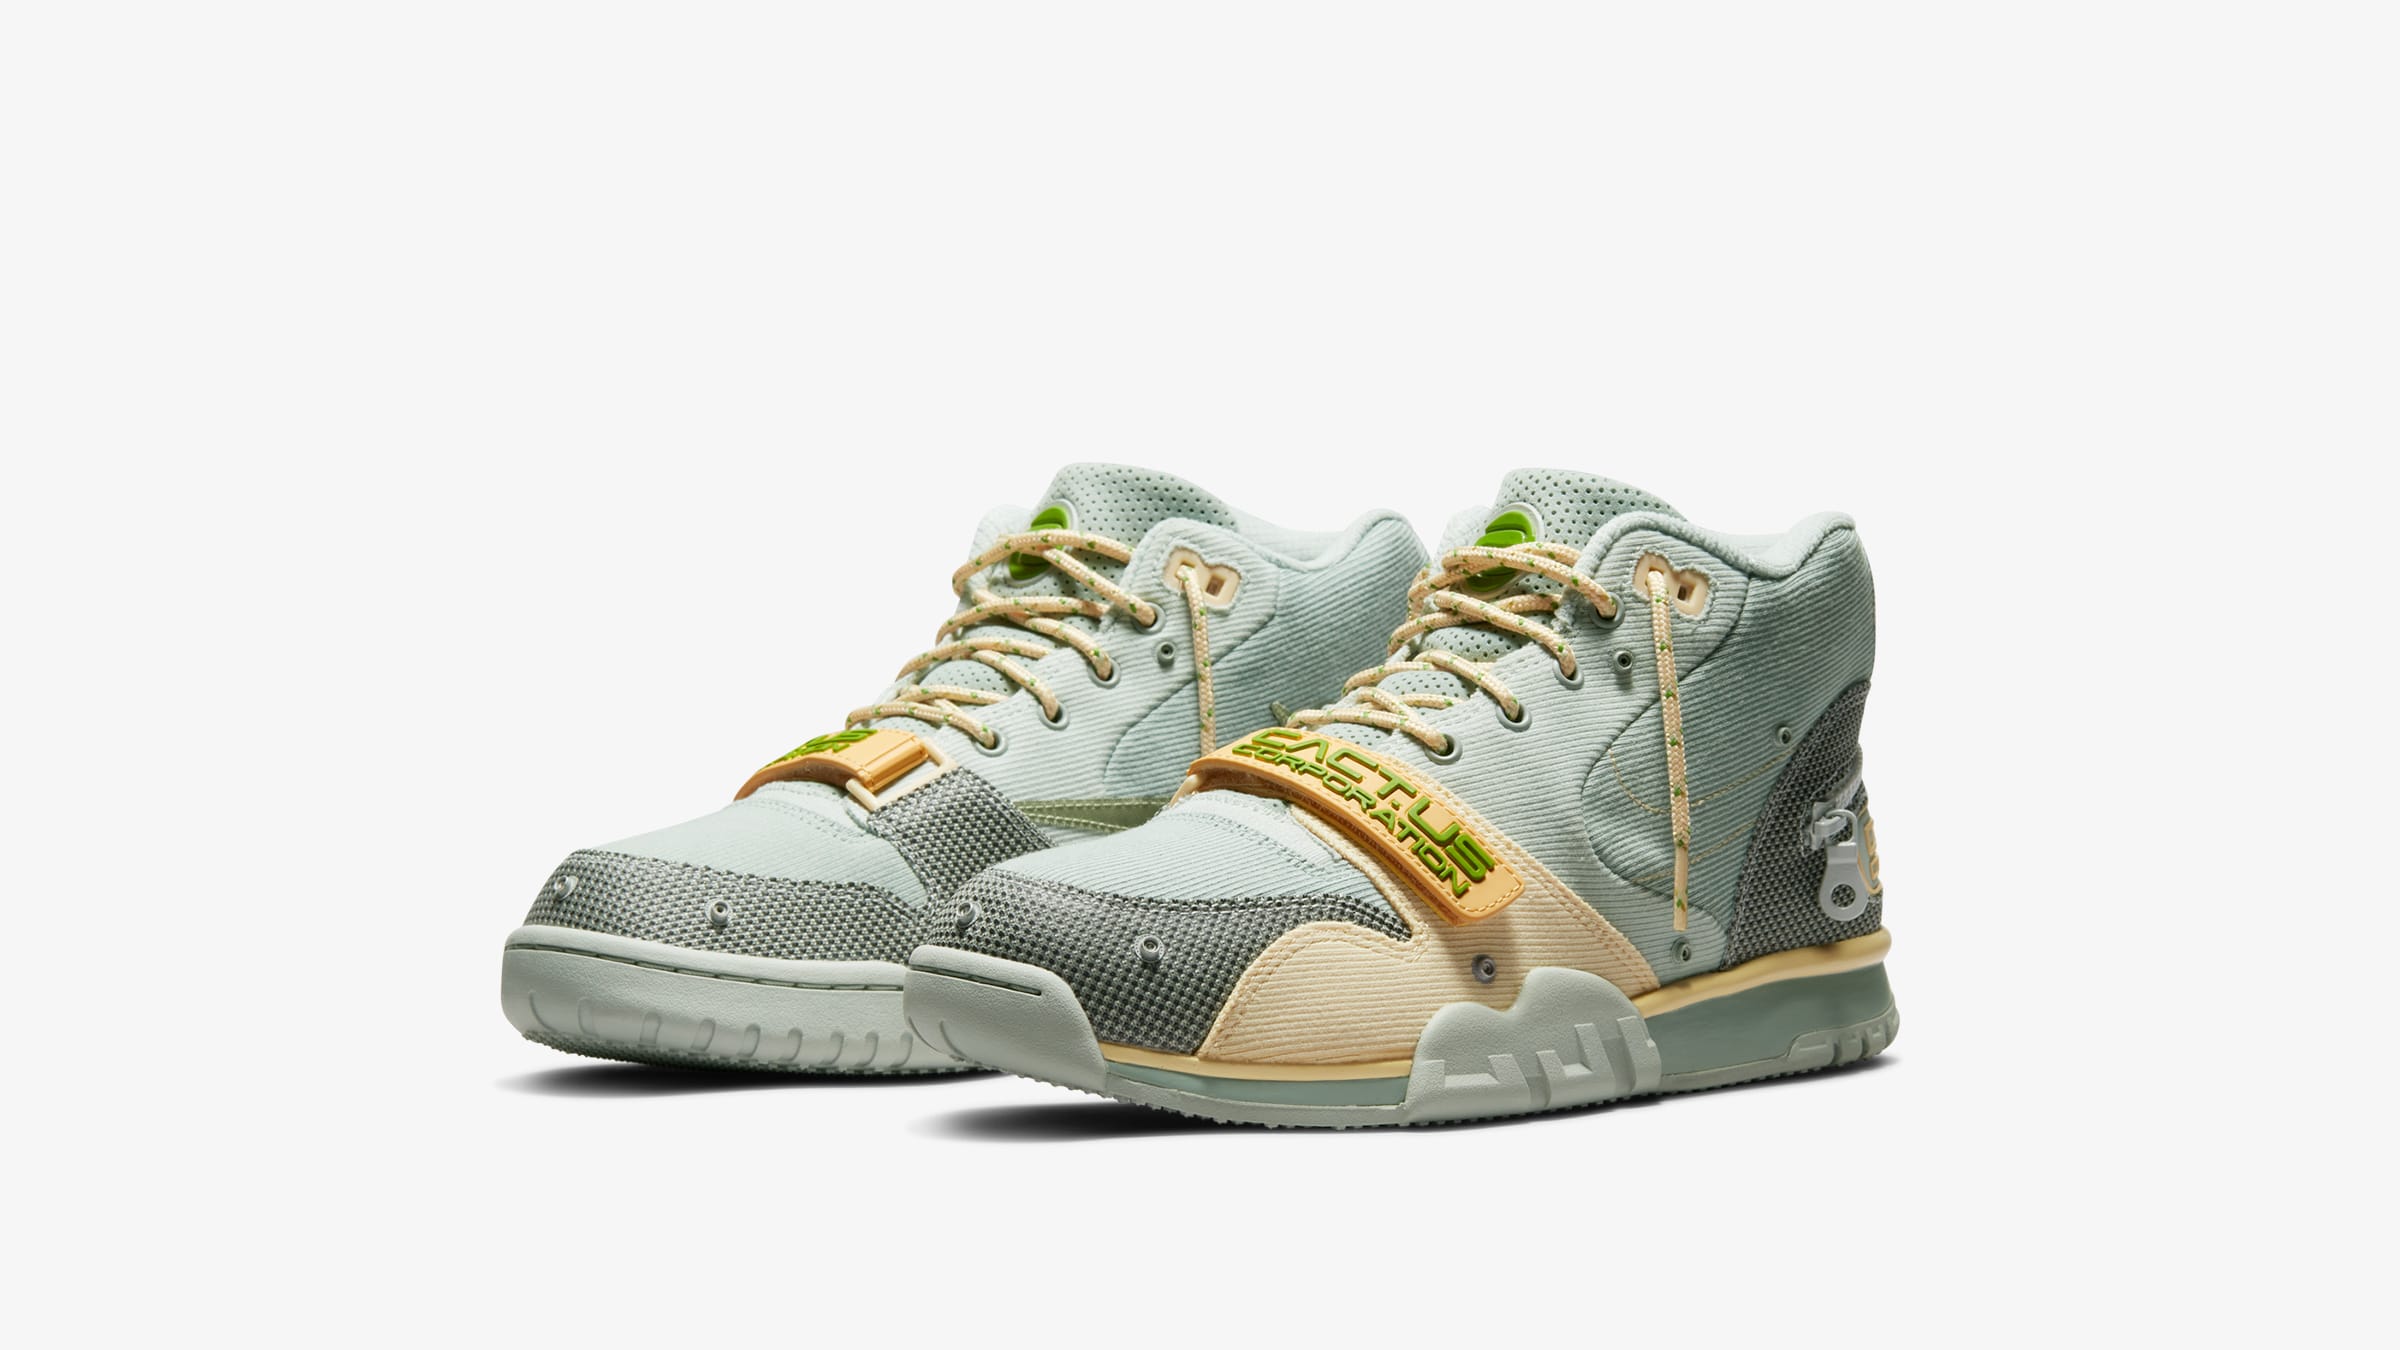 Nike x Travis Scott Air Trainer 1 (Grey, Olive & Sage) | END. Launches